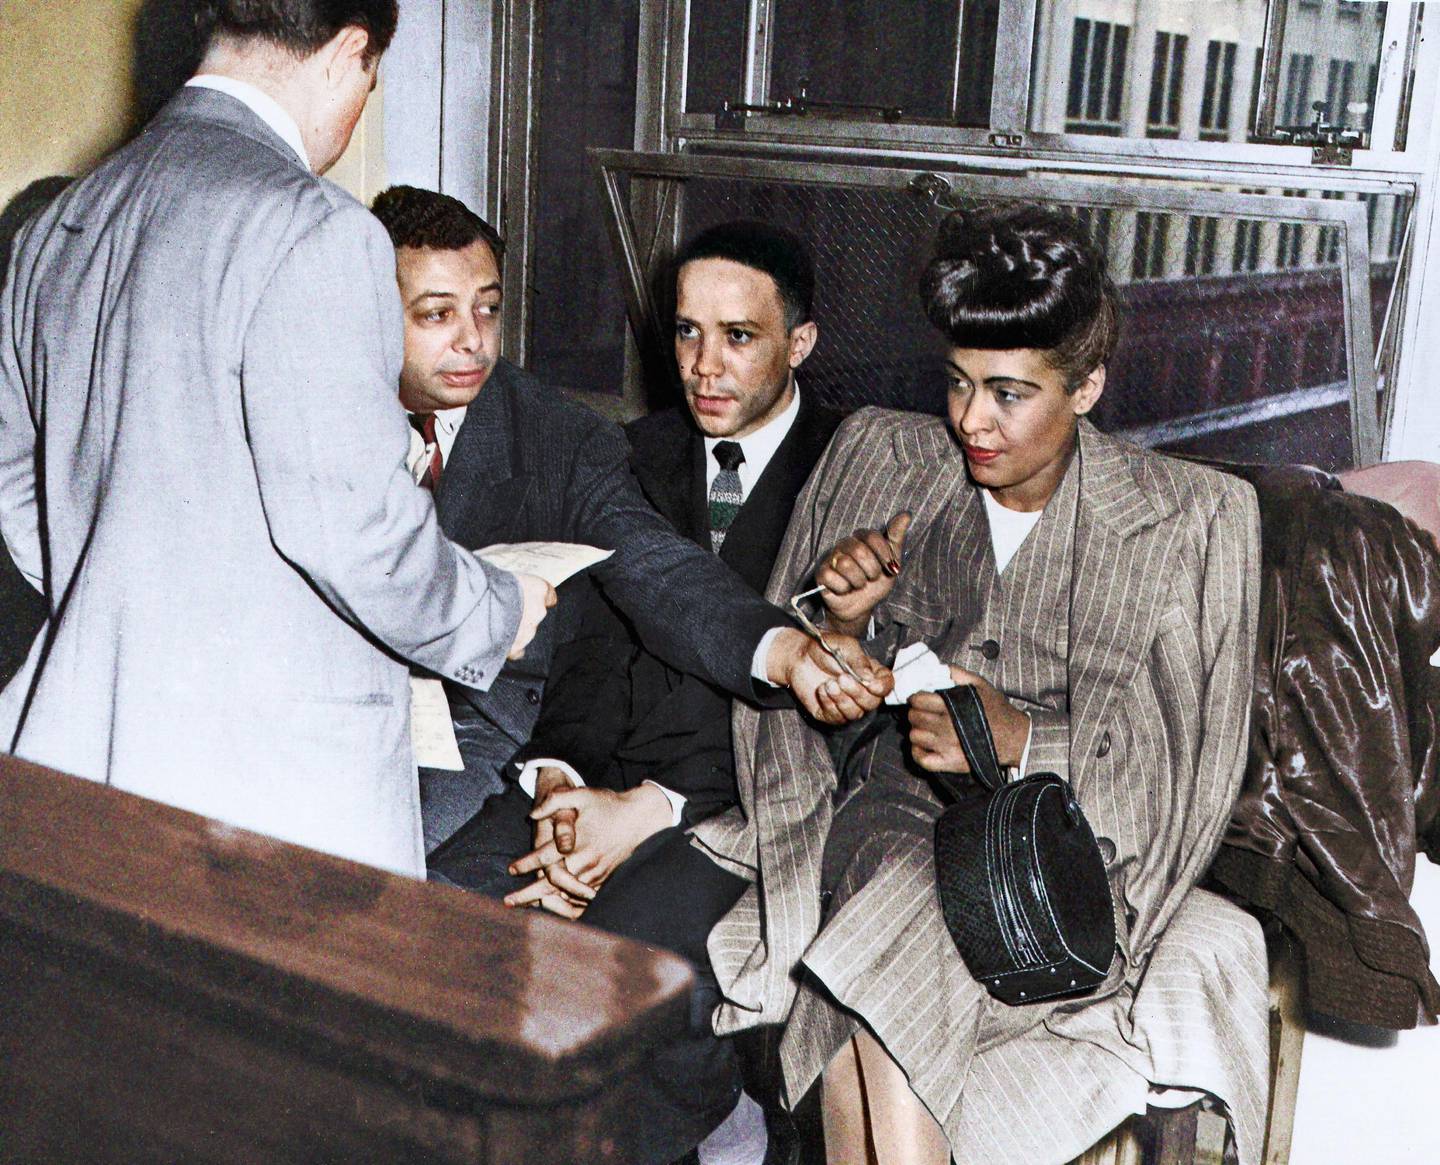 PHILADELPHIA - MAY 20:  Jazz singer Billie Holiday (R) is read the charge for heroin possession at the U.S. Commissioners Office, seated next to her are her pianist Bobby Tucker (C) and road manager James Asendio (R) on May, 20, 1947 in Philadelphia, Pennsylvania.   (Photo by Michael Ochs Archives/Getty Images)